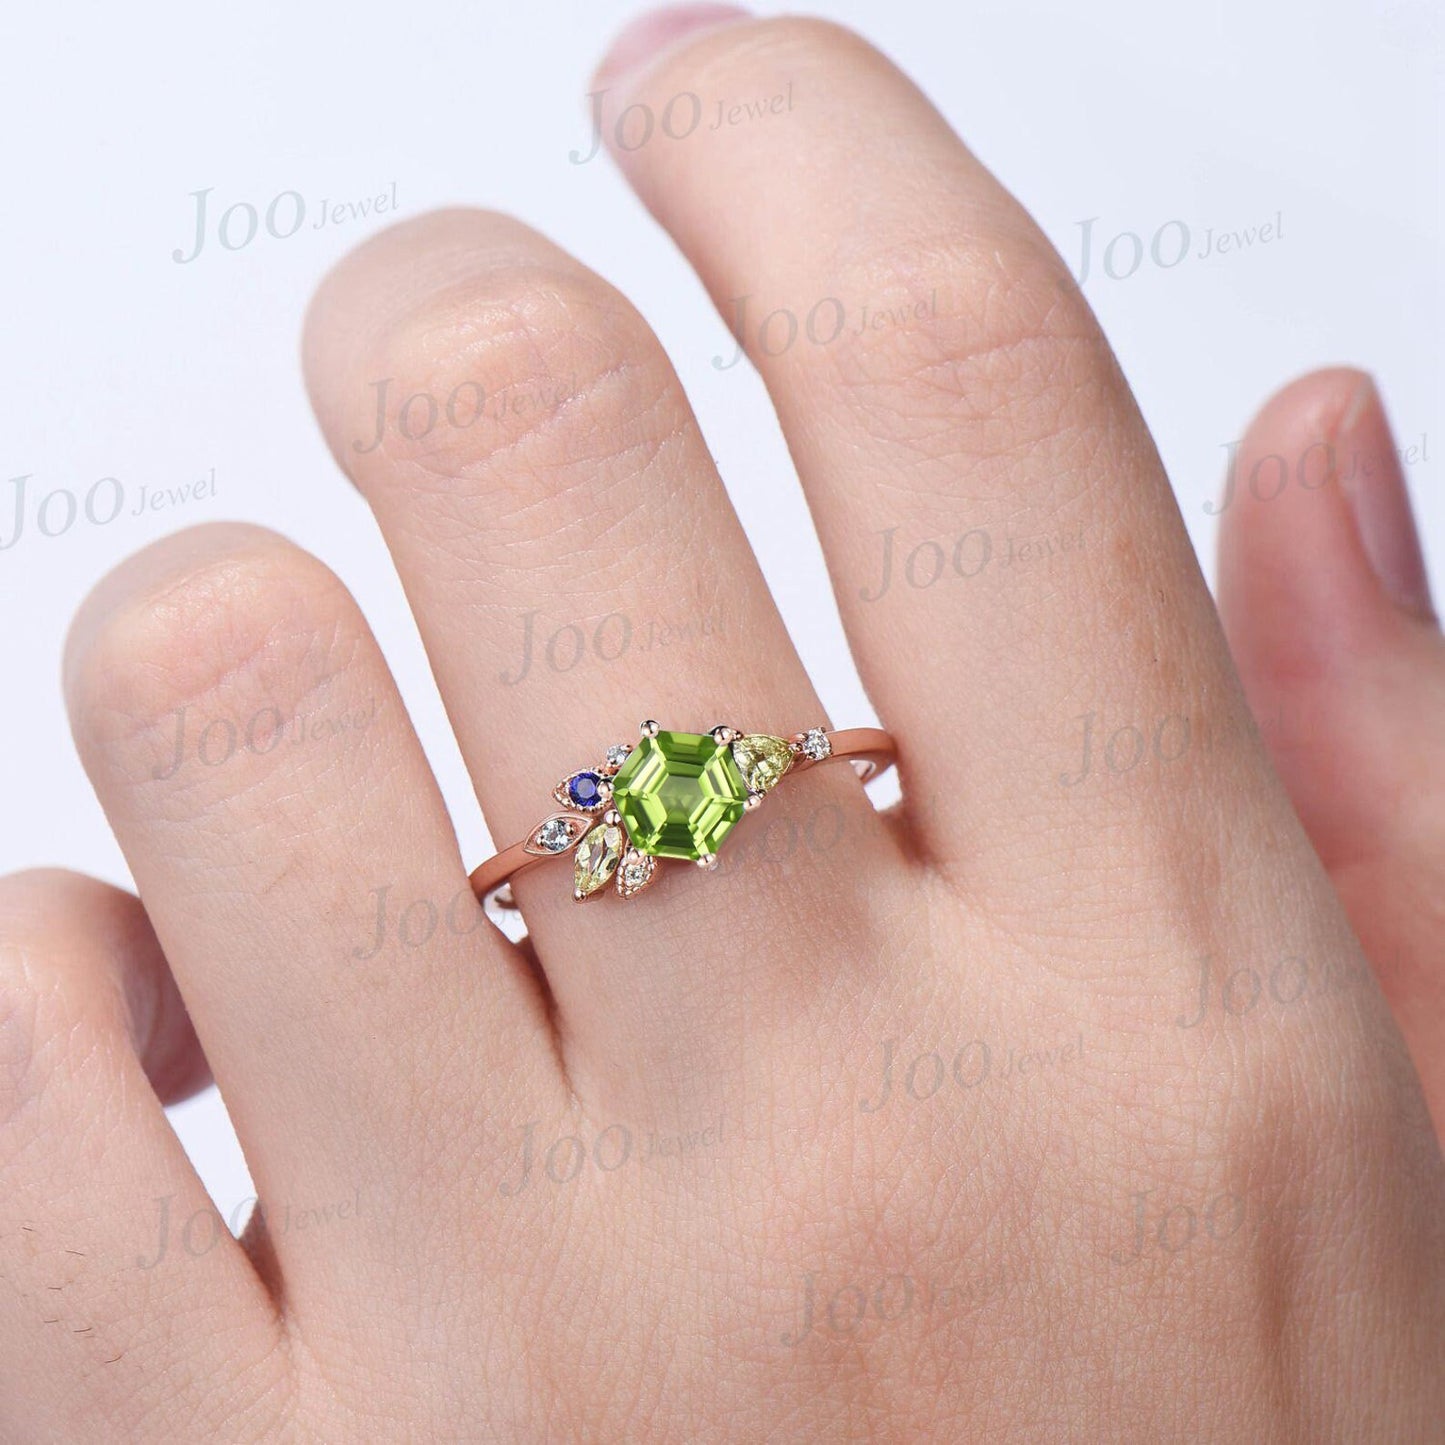 1ct Hexagon Cut Natural Green Peridot Ring 10K Rose Gold August Birthstone Cluster Wedding Ring Personalized Anniversary/Birthday Gift Women